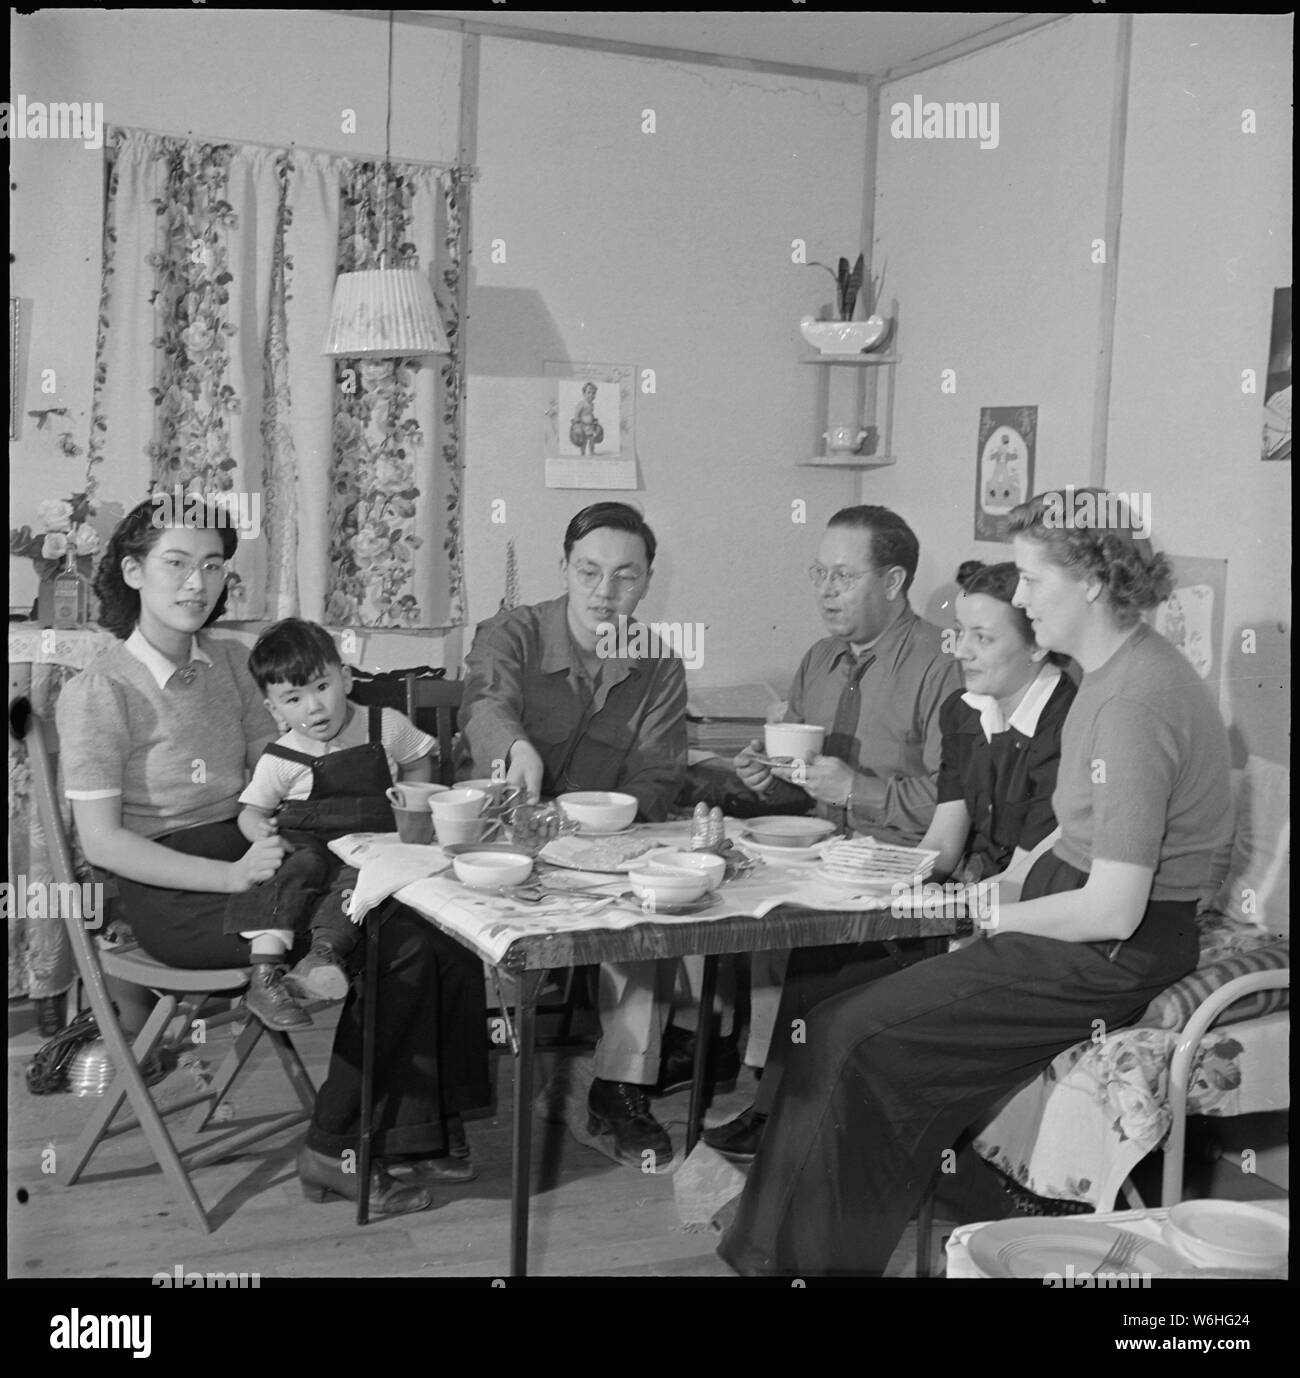 Heart Mountain Relocation Center, Heart Mountain, Wyoming. In his barracks home at Block 7 - 21, Bi . . .; Scope and content:  The full caption for this photograph reads: Heart Mountain Relocation Center, Heart Mountain, Wyoming. In his barracks home at Block 7 - 21, Bill Hosokawa and his wife Alice serves oyster stew in an evening's visit with the members of the War Relocation Authority appointed personnel. Left to right is Julona Steinheider, High School Mathematics Teacher; Margaret Jensen, Center Librarian; Vaughn Mechau, Reports Officer; Bill, his son Mike and his wife, Alice. (This appea Stock Photo